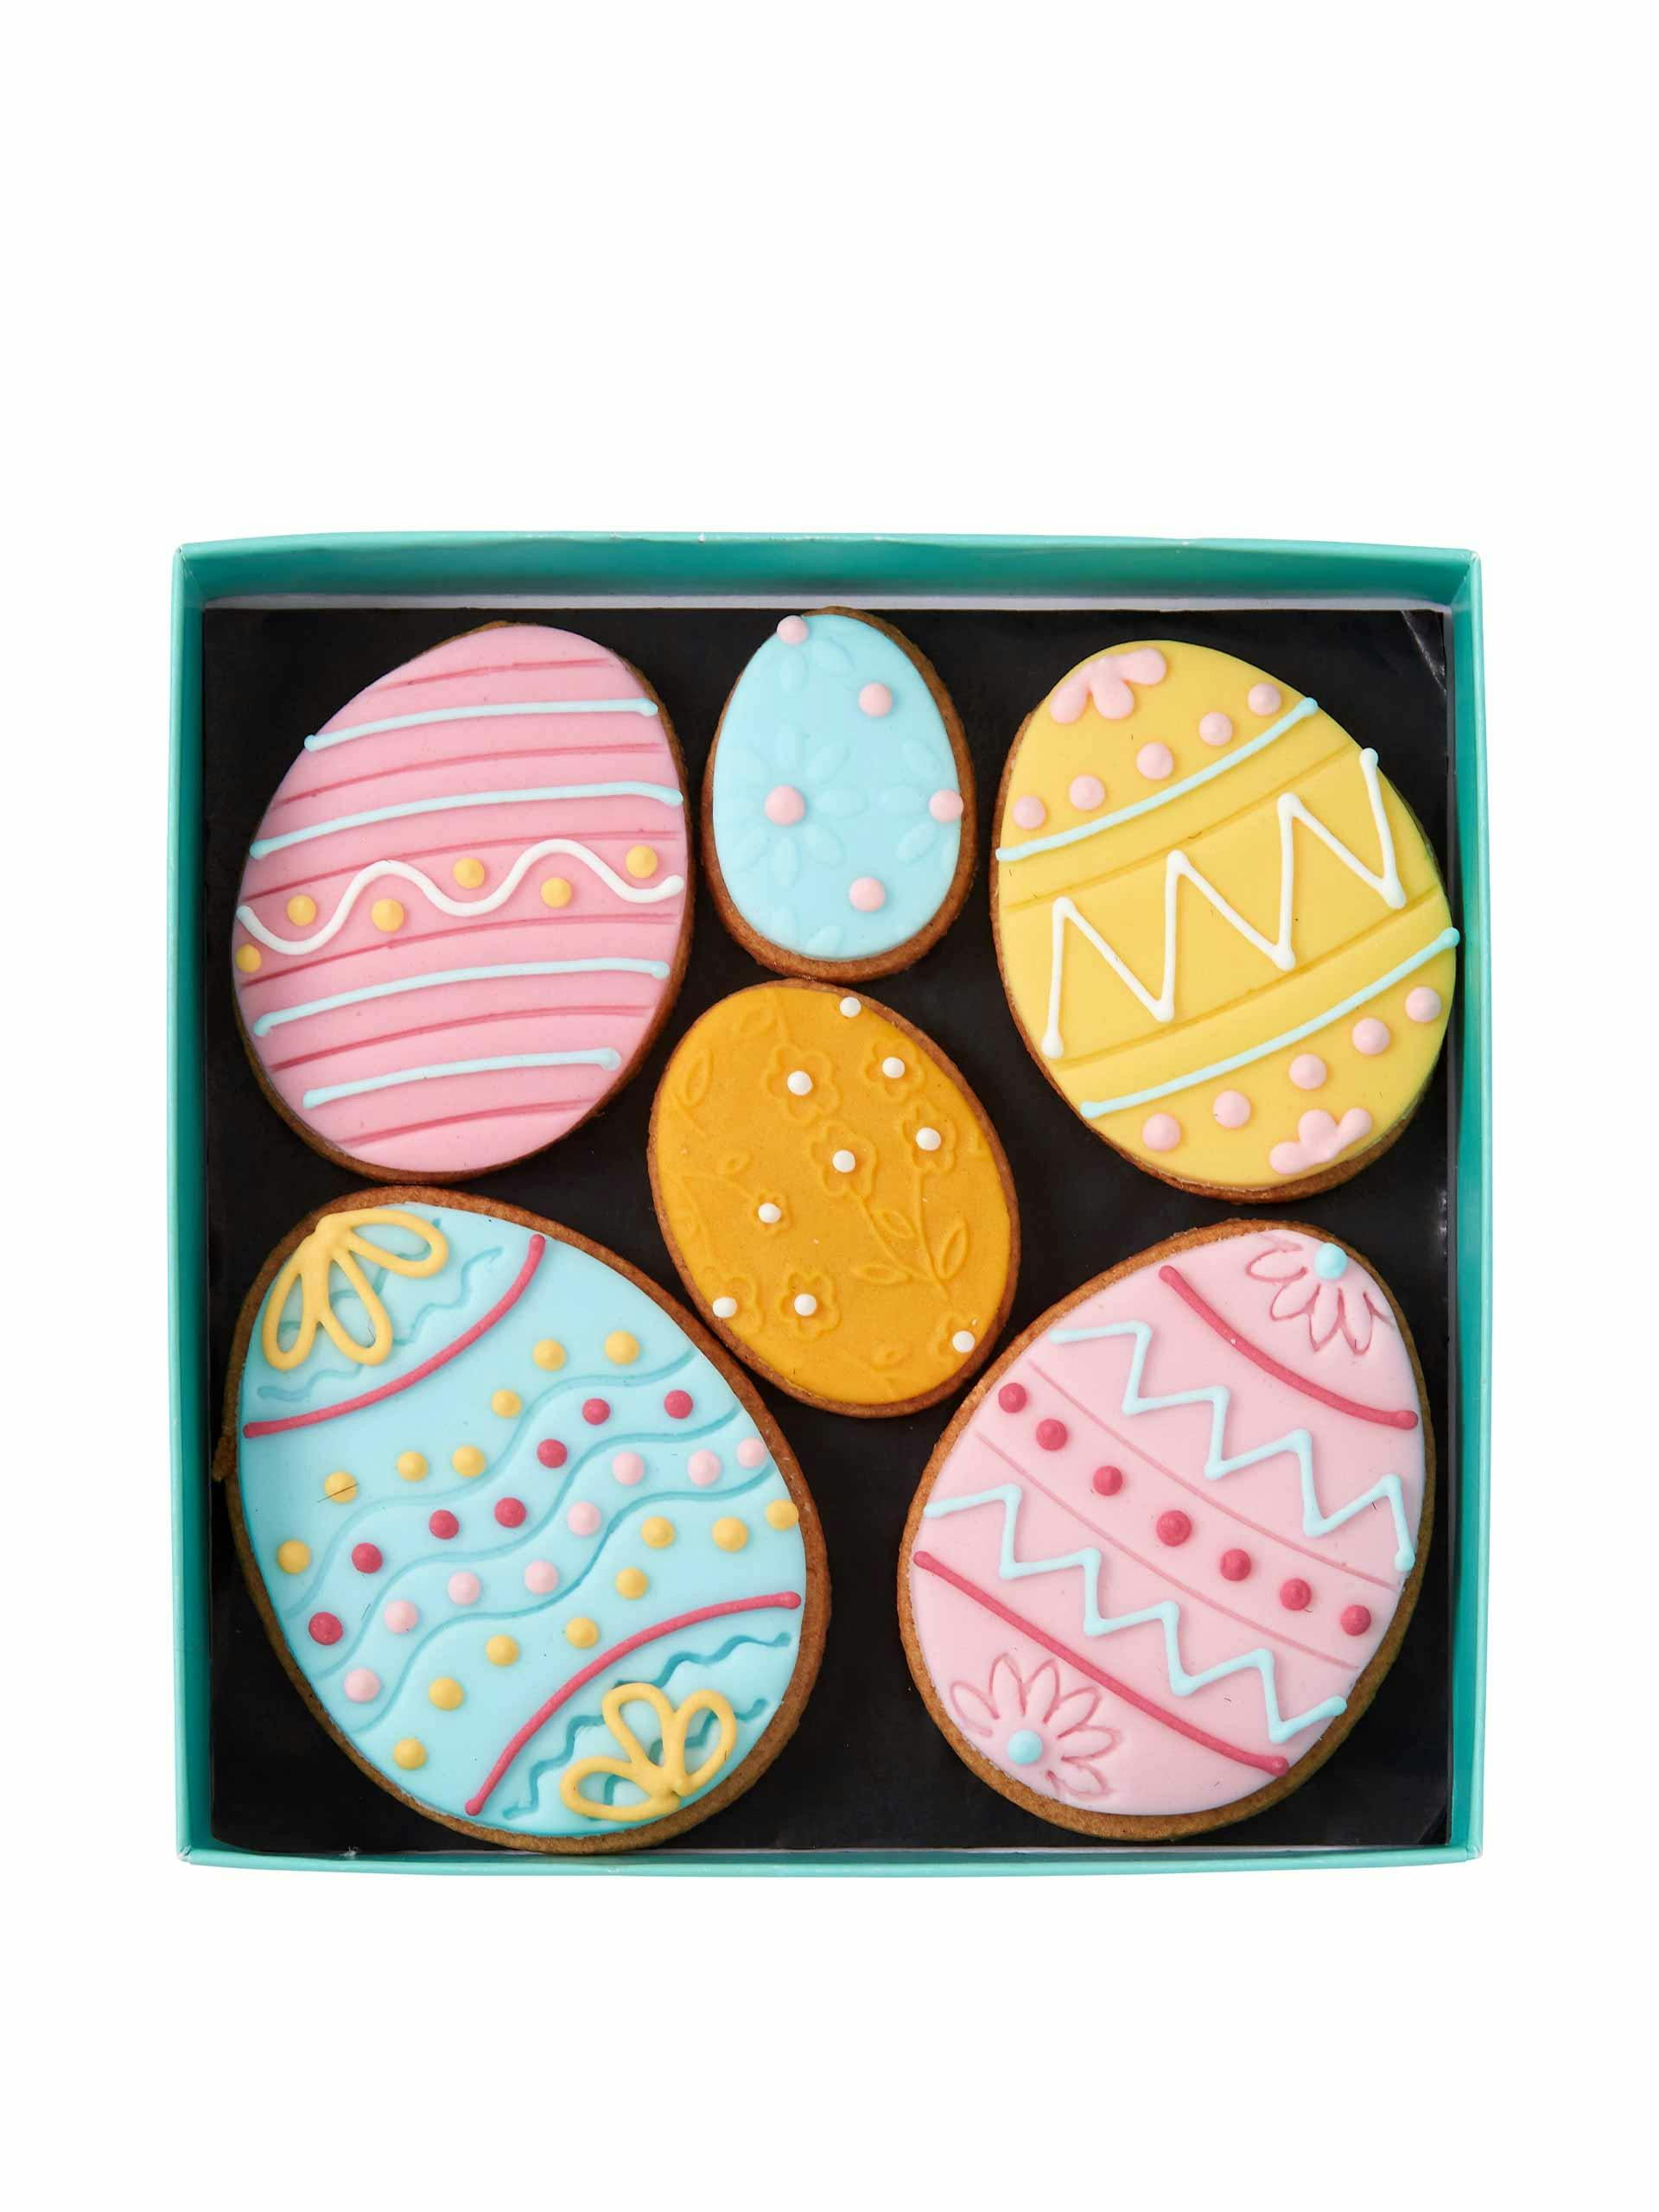 Easter Egg biscuits